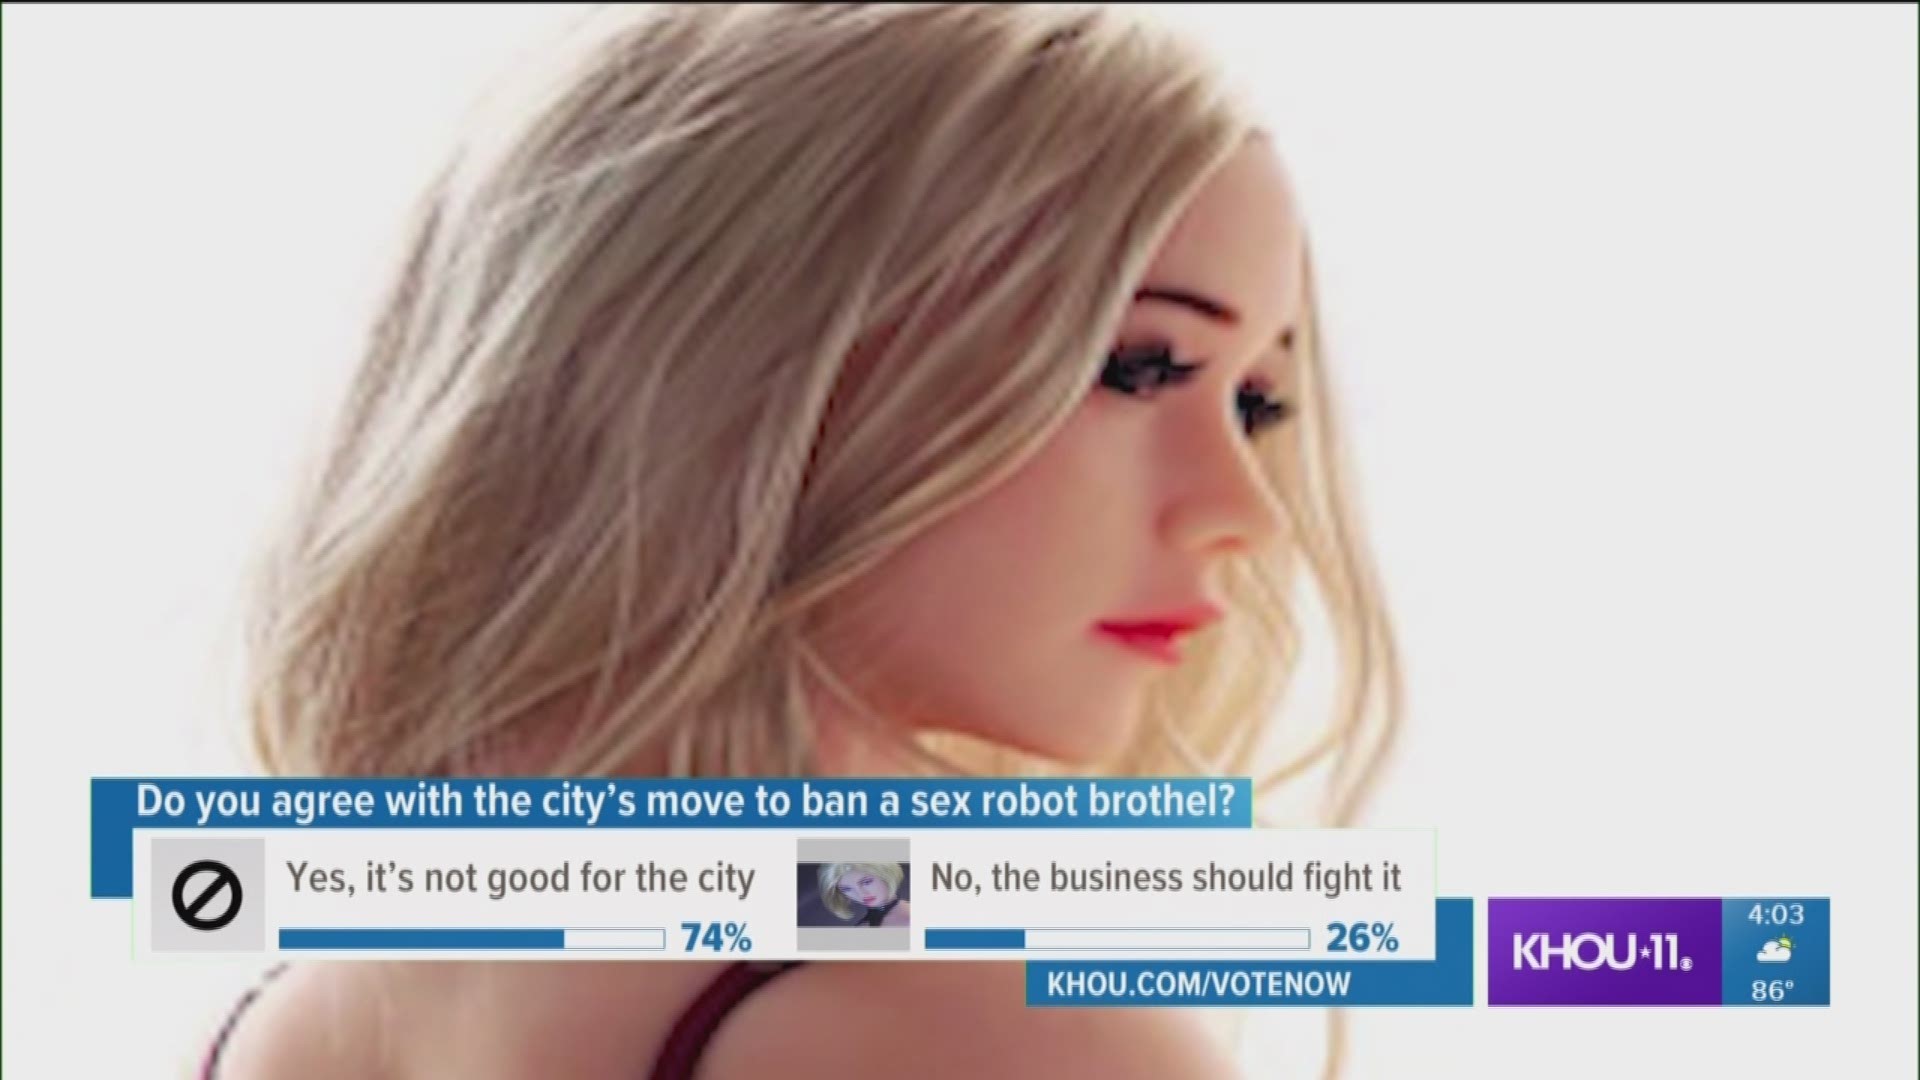 Sex robot brothels will not be coming to Houston. The City Council voted Wednesday to ban using robots at that business. Here's the thing, though: the robots can still be sold.